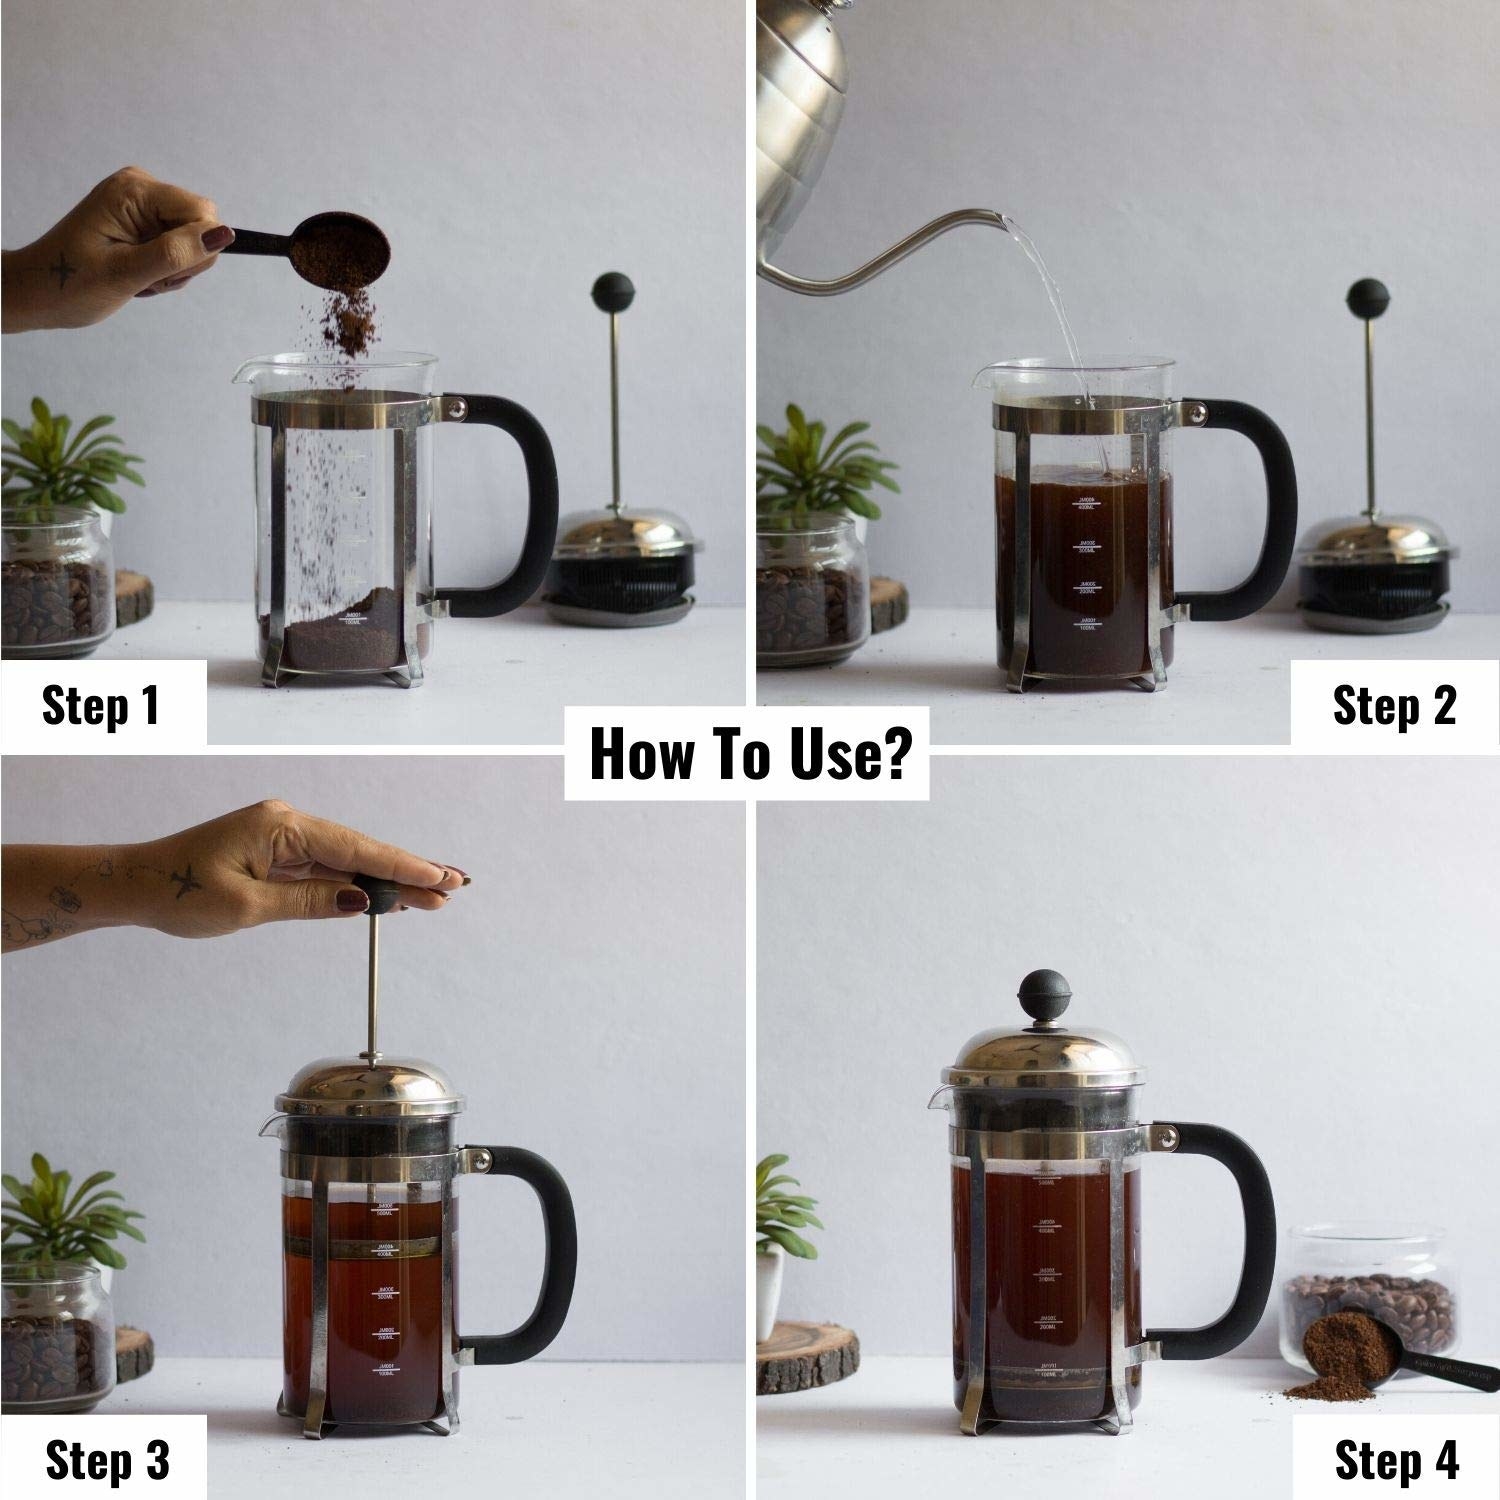 Instructions on how to use the French Press